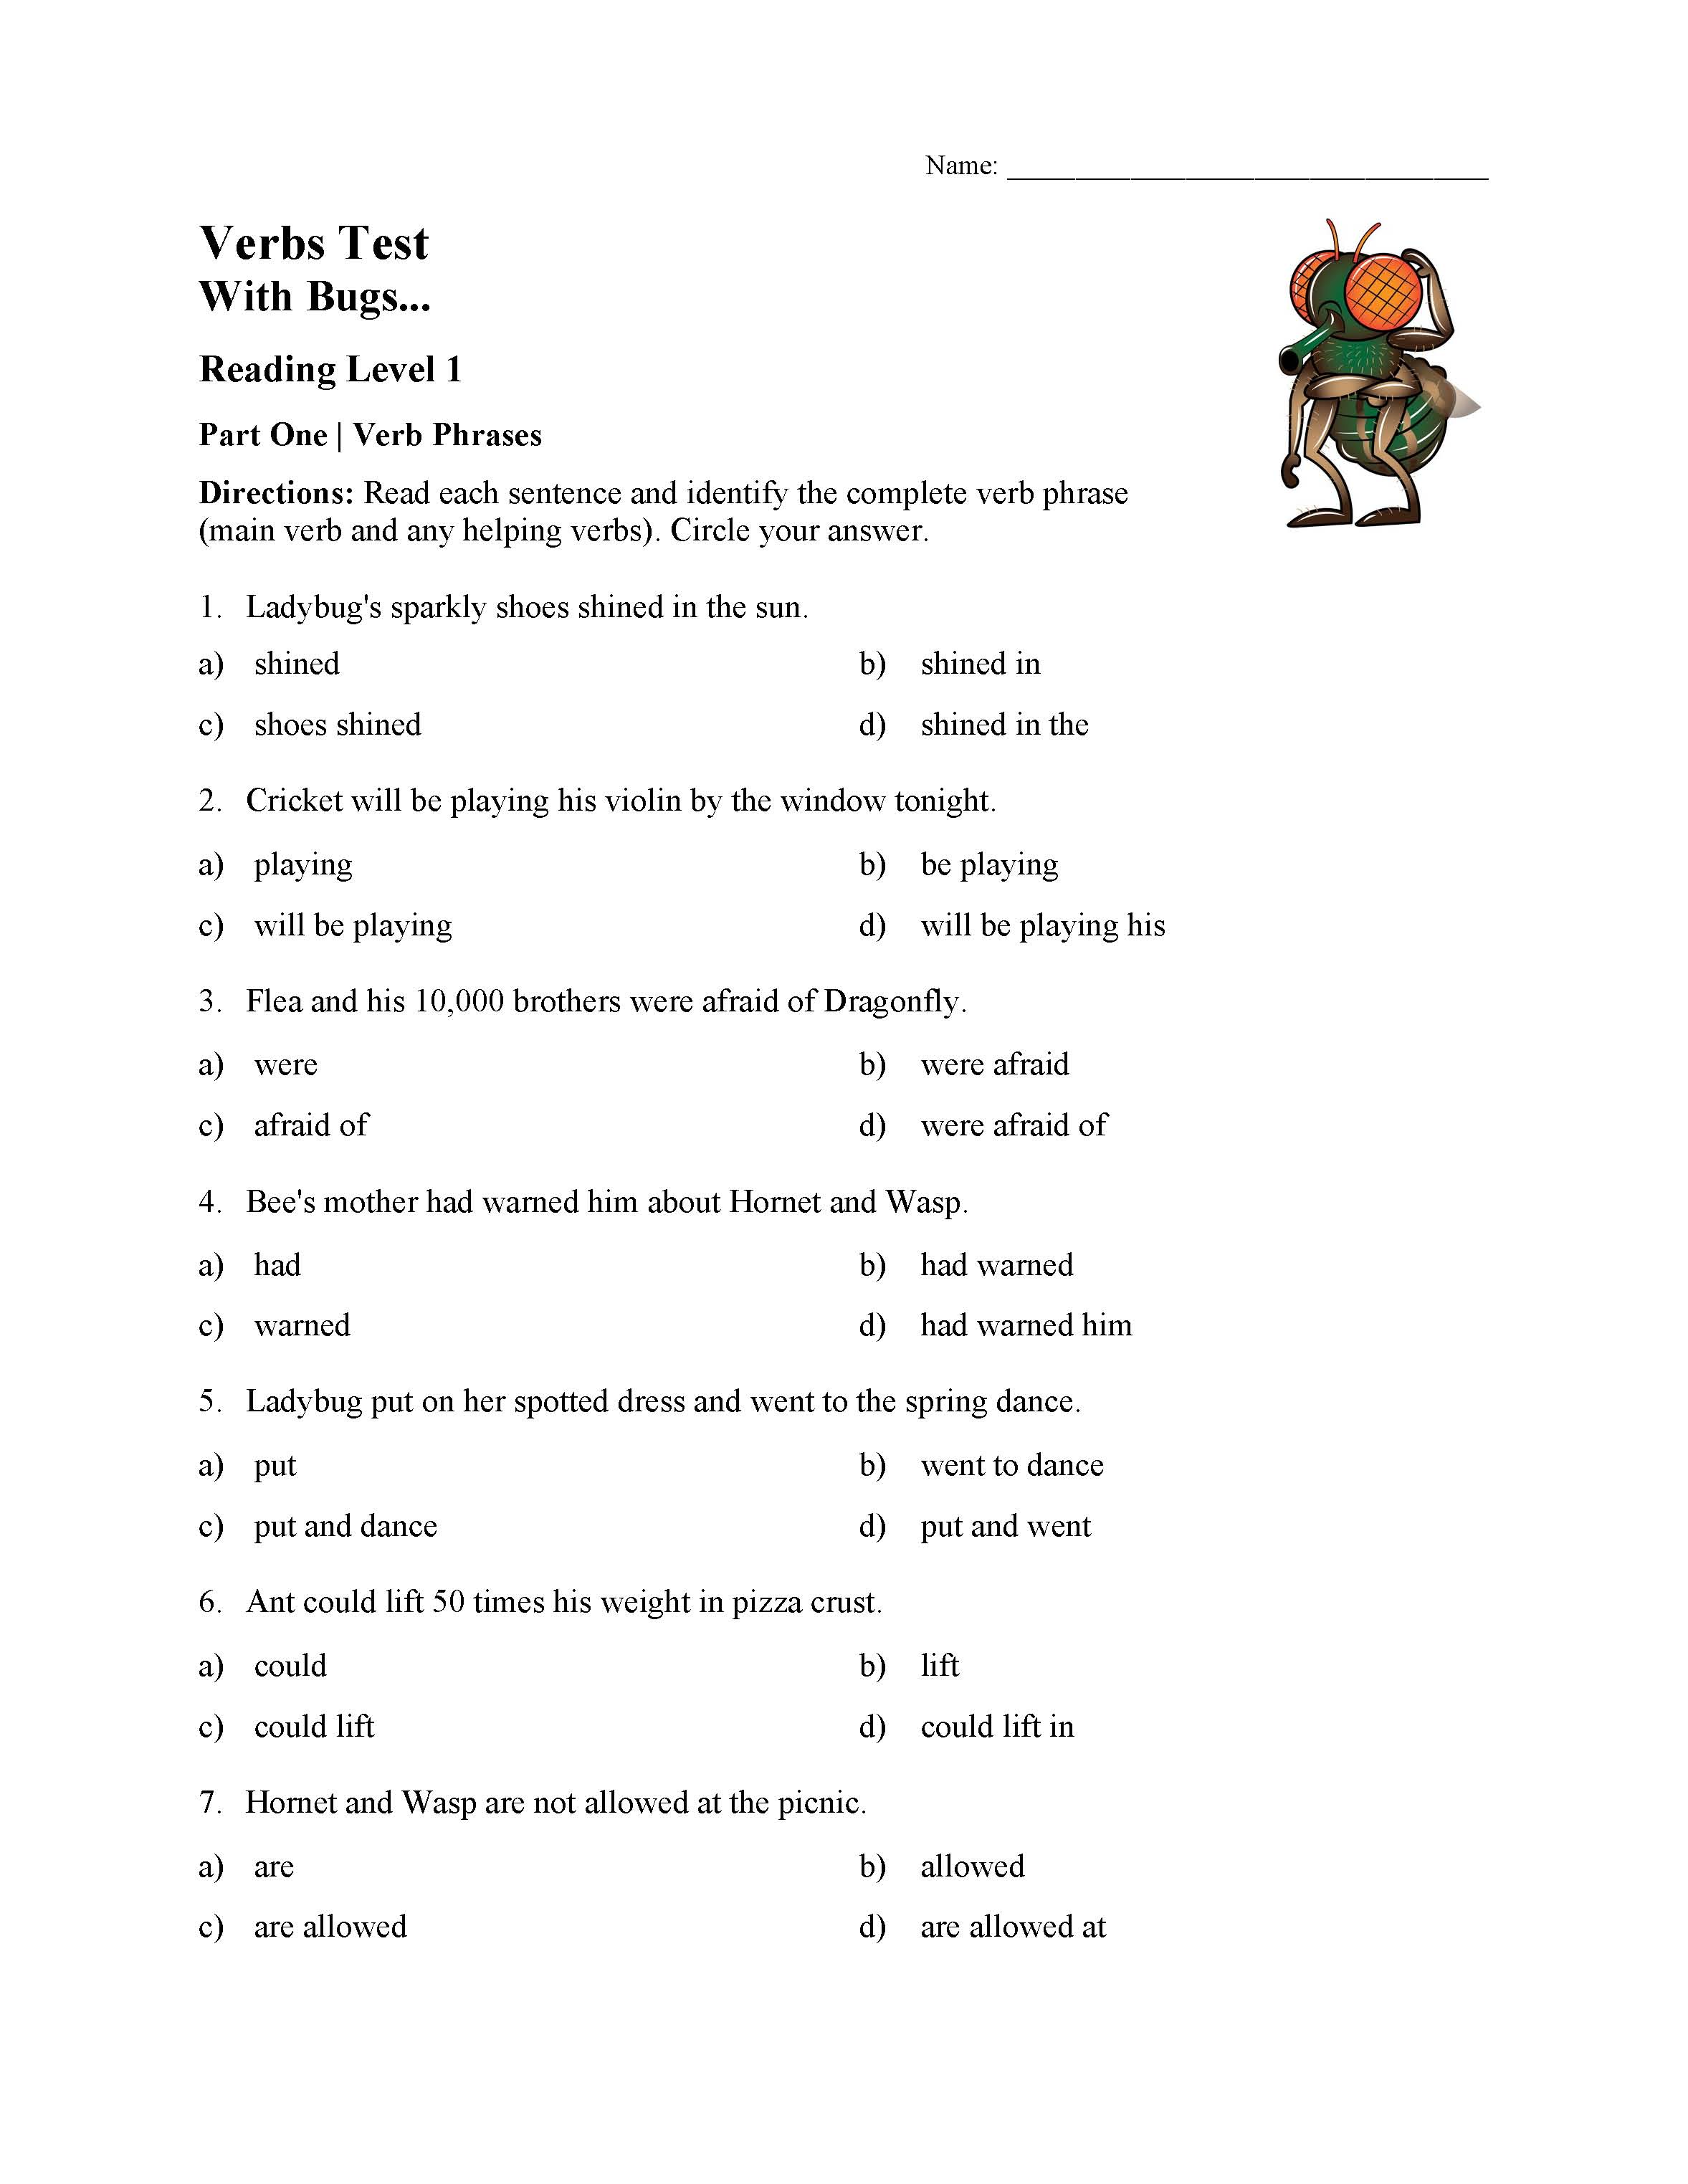 This is a preview image of the Verbs Test - With Bugs | Reading Level 1.